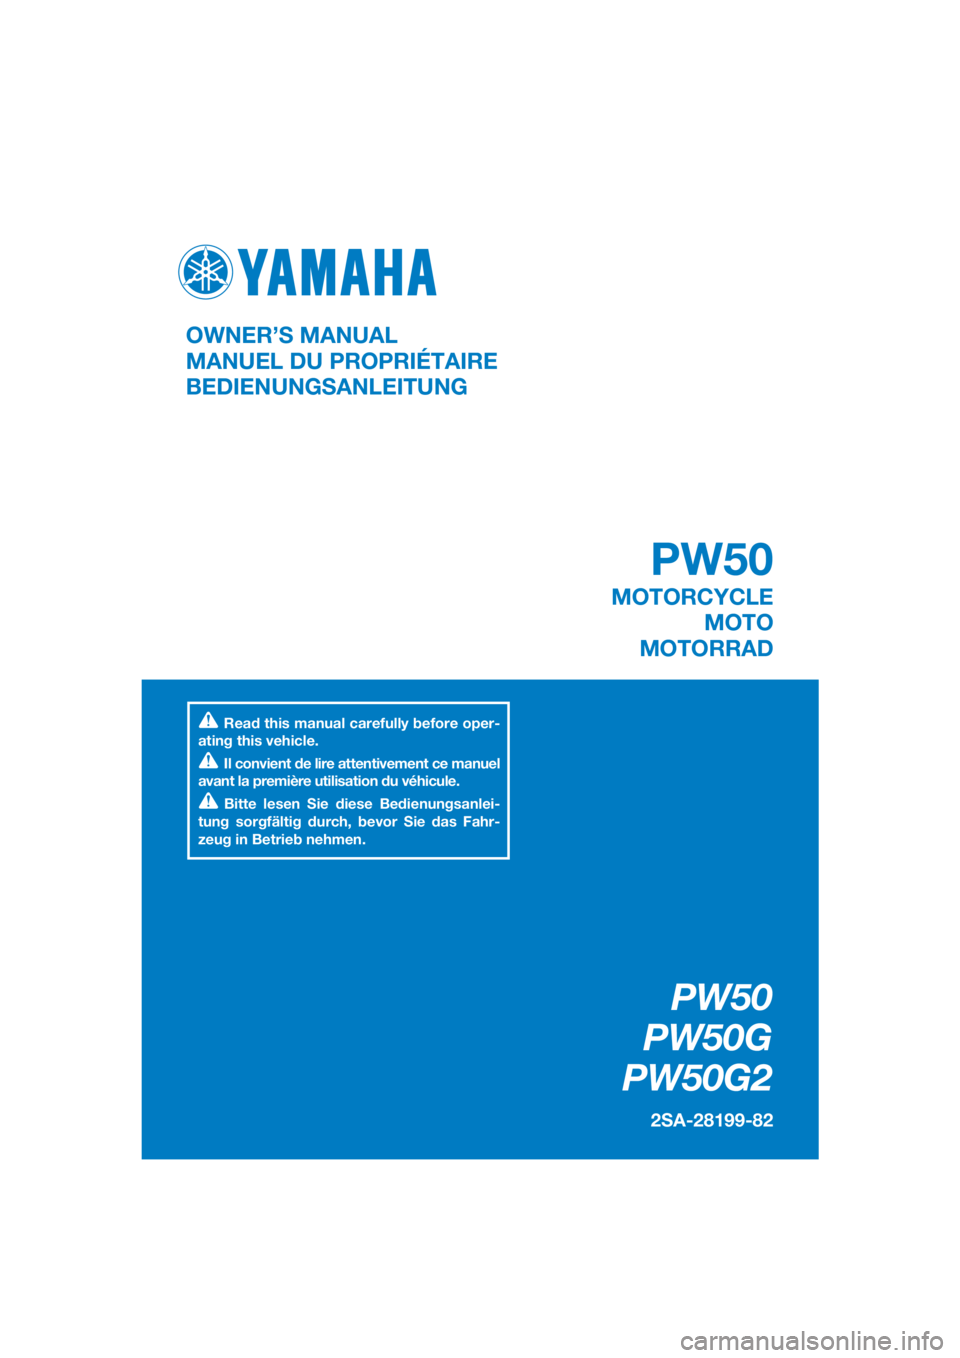 YAMAHA PW50 2016  Notices Demploi (in French) DIC183
PW50
PW50G
PW50G2
2SA-28199-82
OWNER’S MANUAL
MANUEL DU PROPRIÉTAIRE
BEDIENUNGSANLEITUNG
Read this manual carefully before oper-
ating this vehicle.
Il convient de lire attentivement ce manu